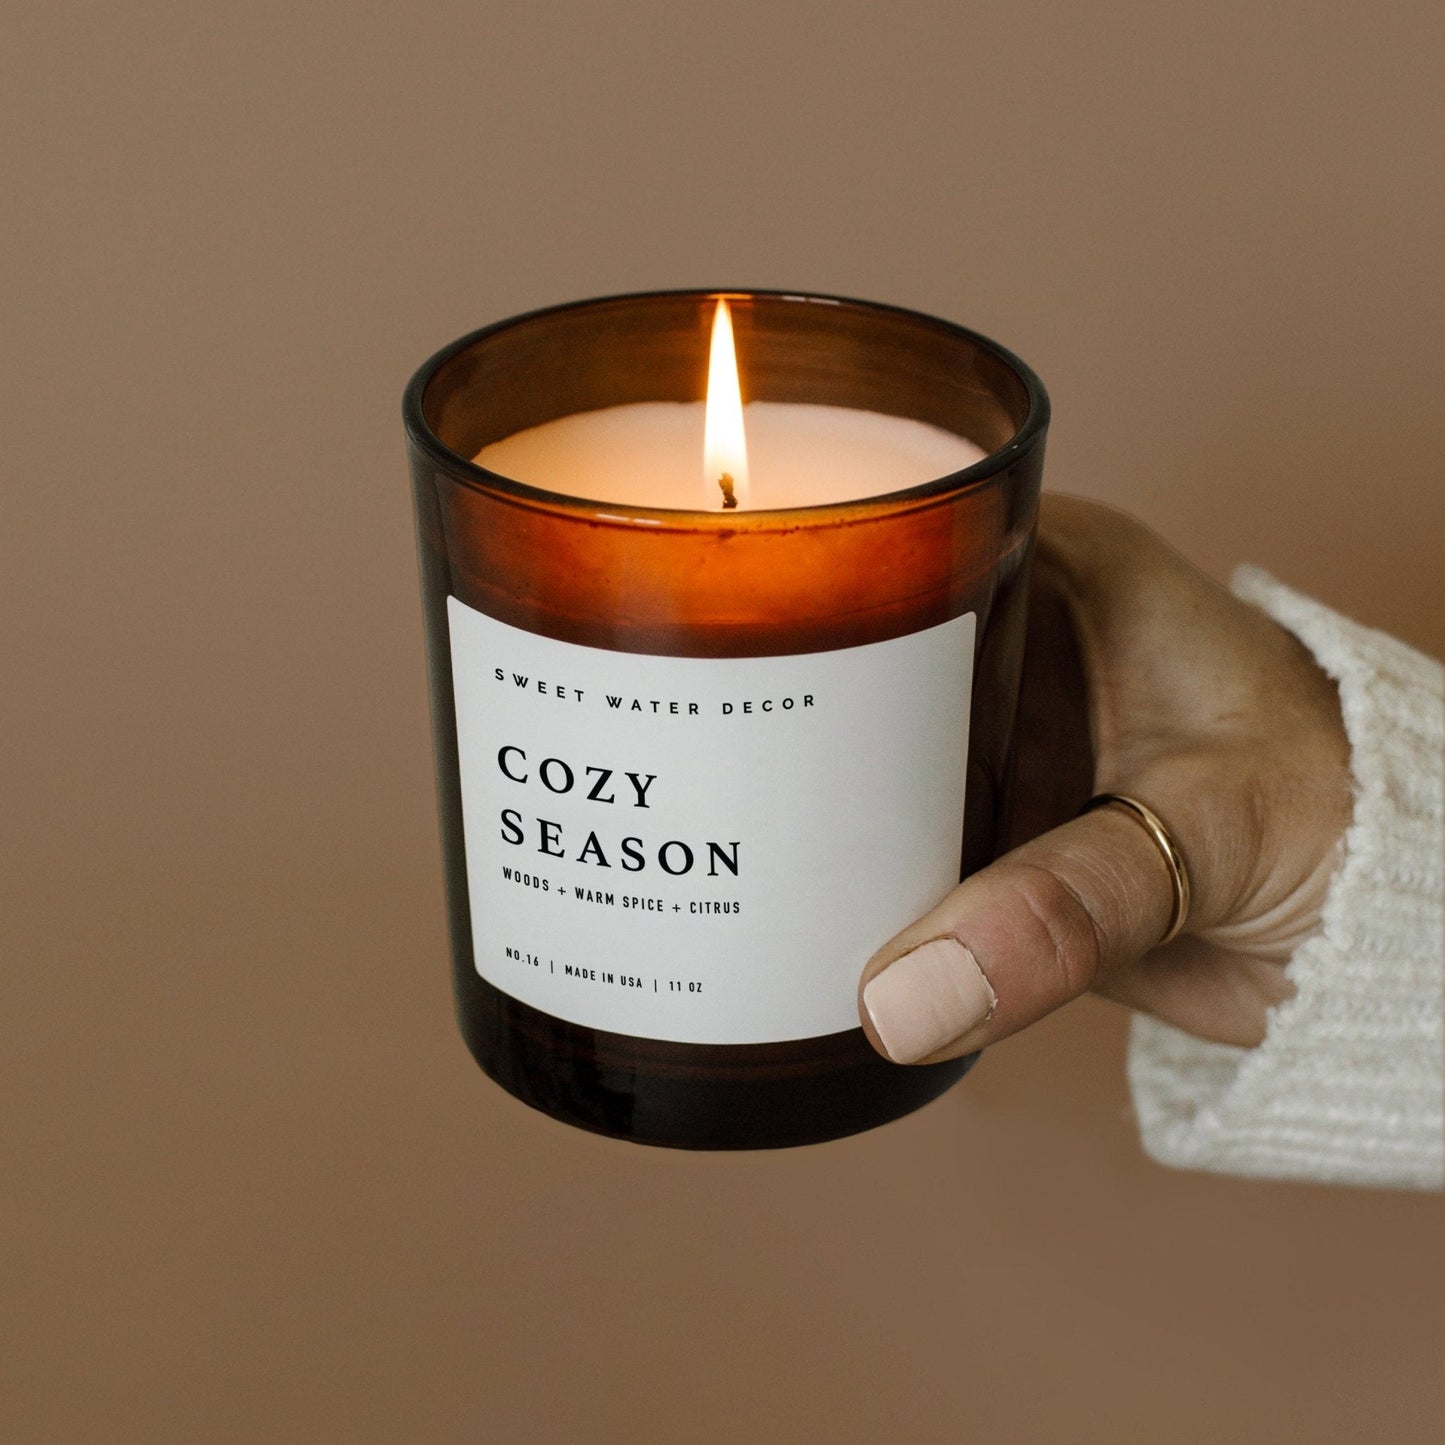 Cozy Season Soy Candle - Amber Jar - 11 oz by Sweet Water Decor